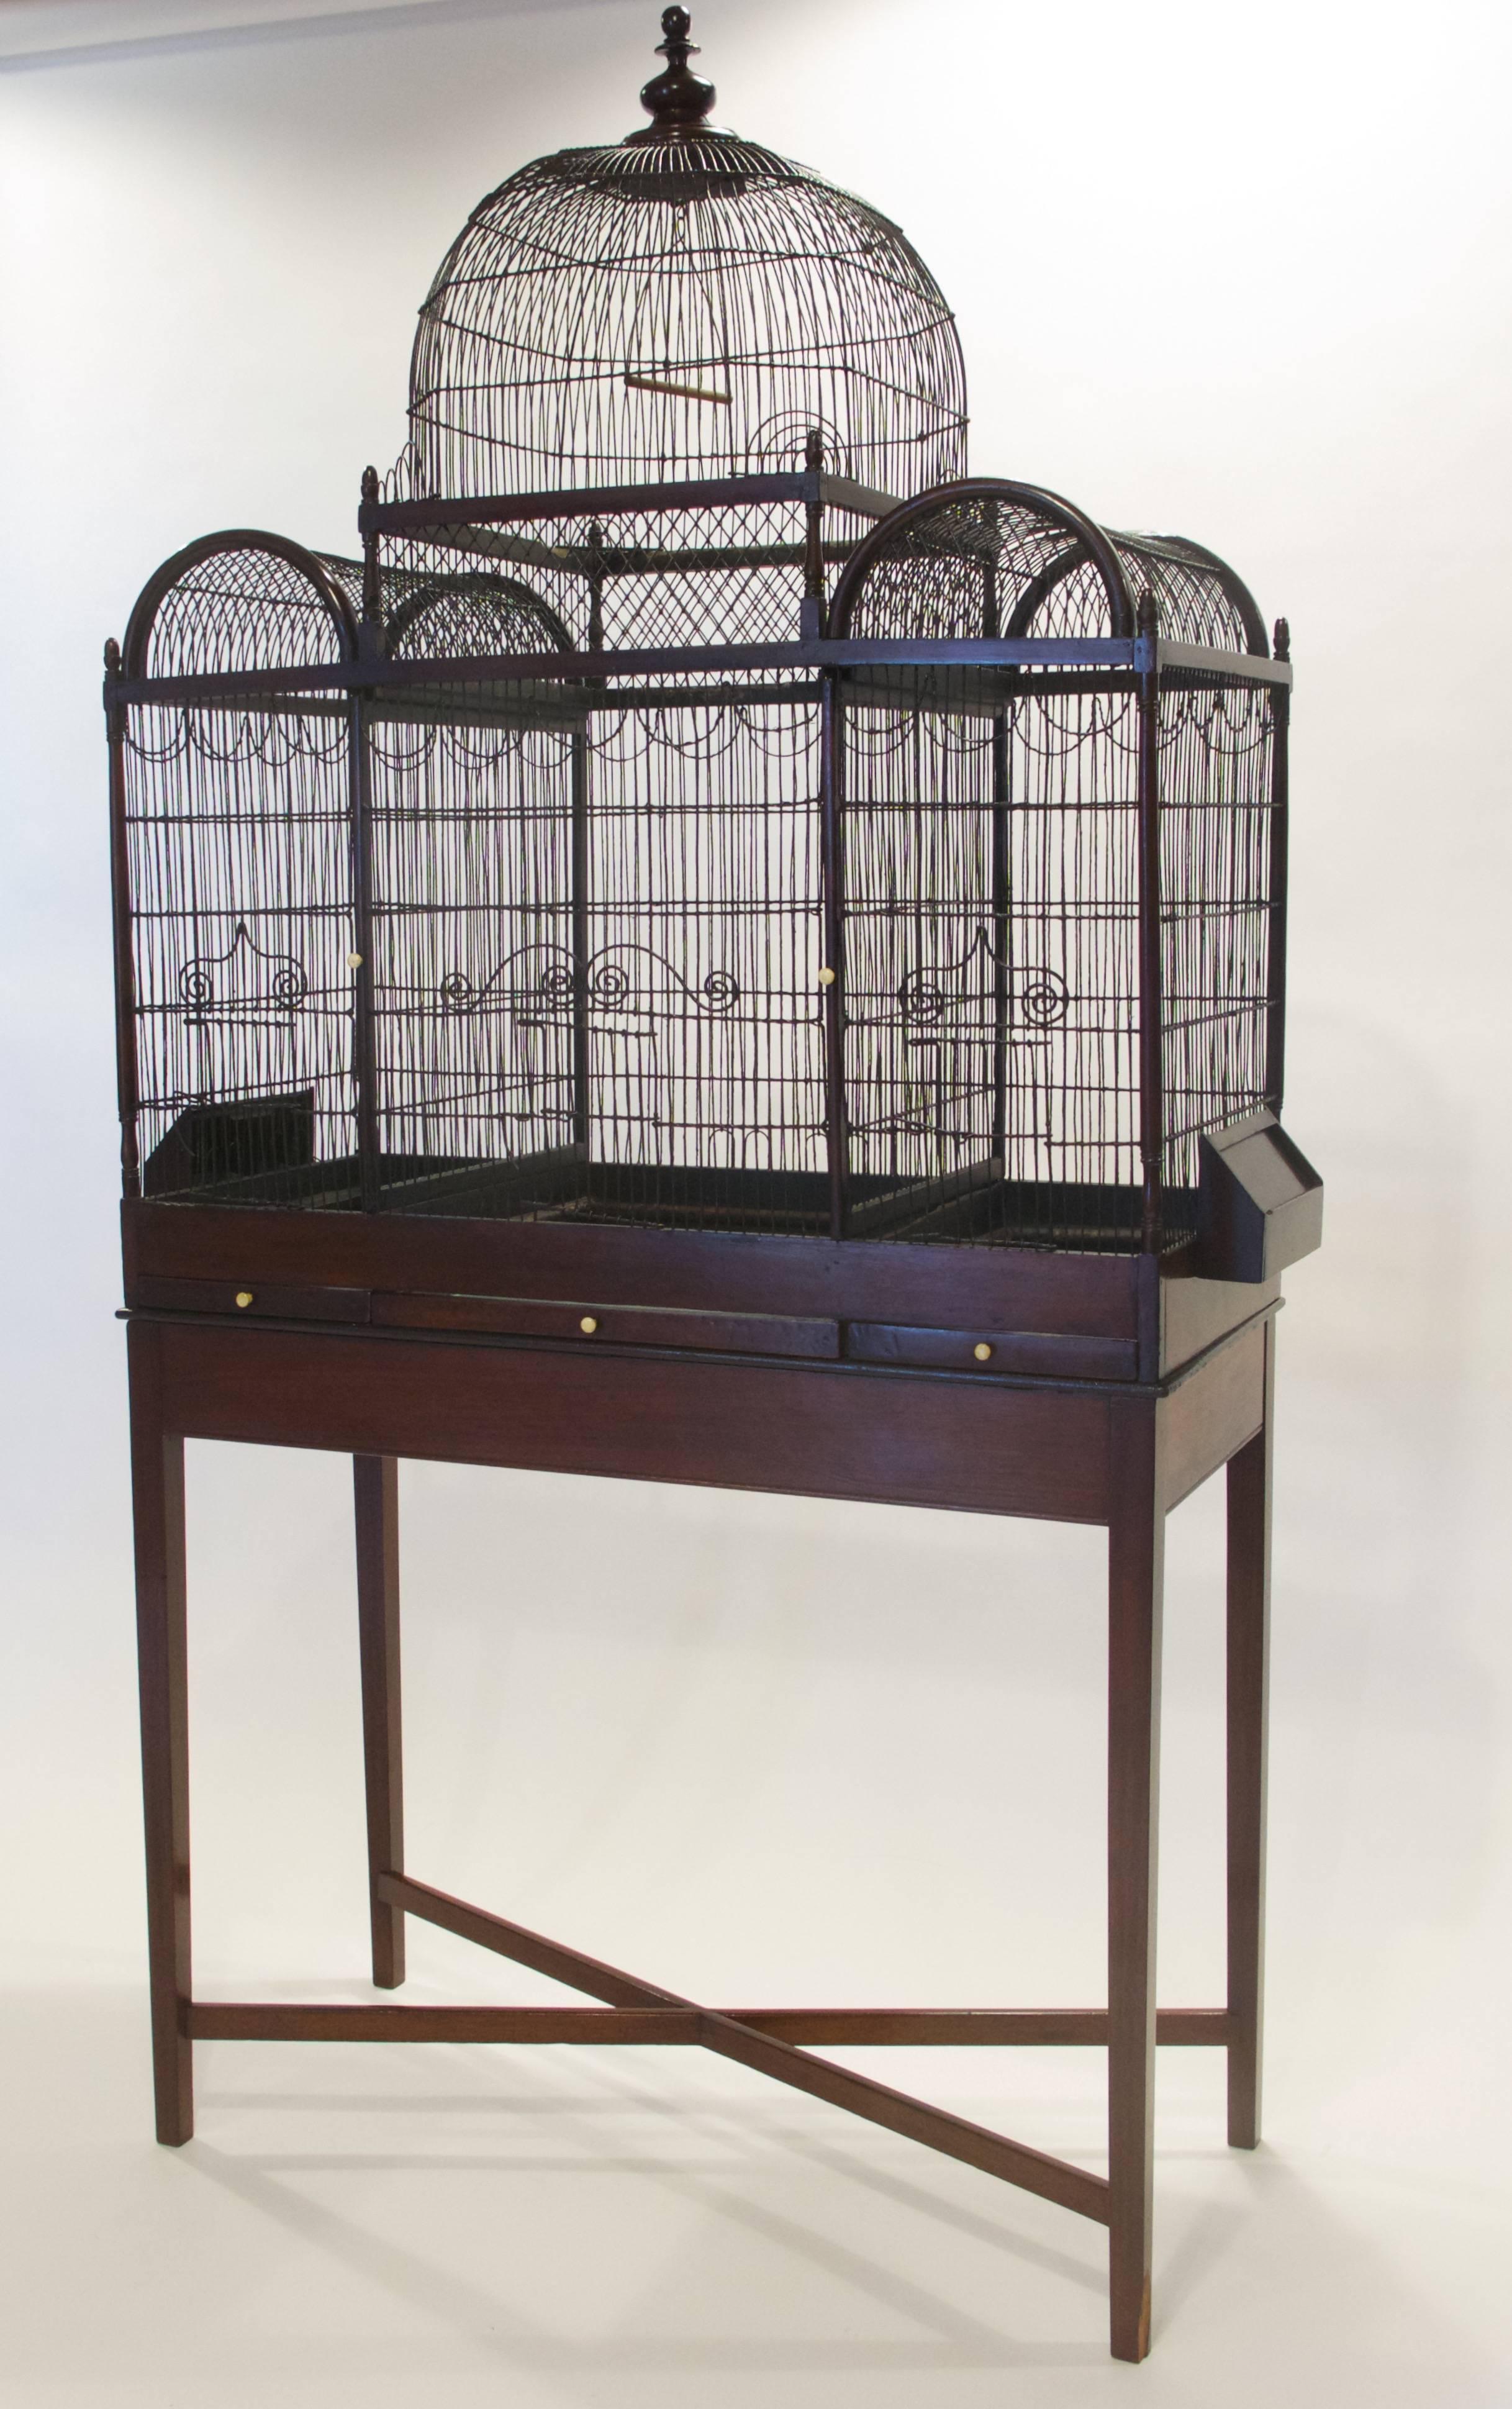 This fine and rare English George III period birdcage is tripartite in form, with a mahogany frame surrounding painted wire cages, of Orientalist form with a central dome with flanking semi circular domes. Each cage has decorative wire curlicue